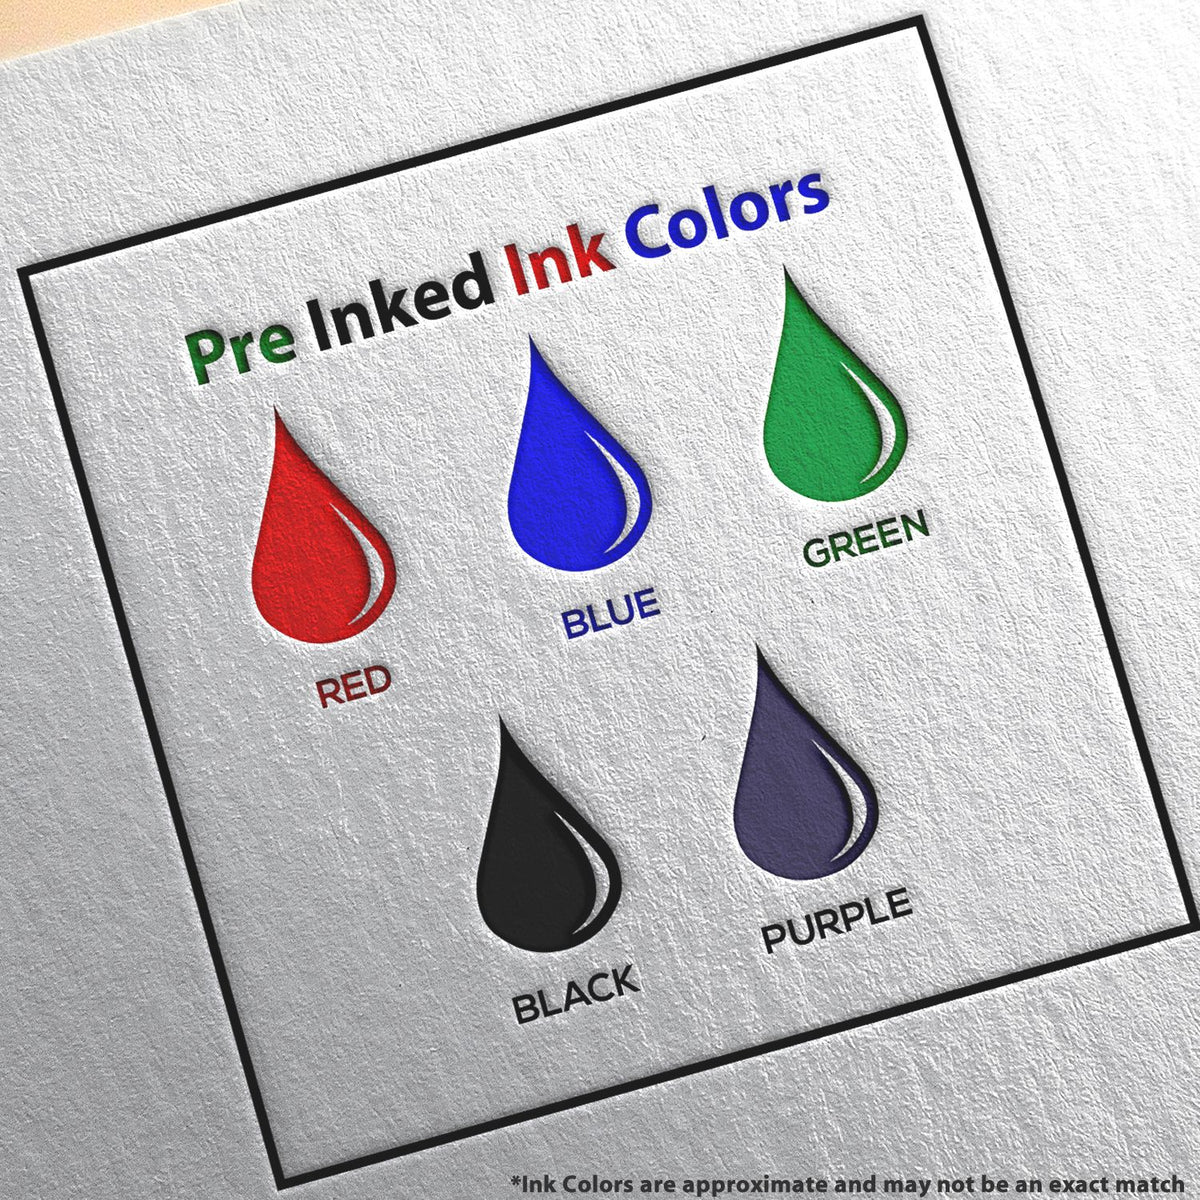 A picture showing the different ink colors or hues available for the Slim Pre-Inked Massachusetts Land Surveyor Seal Stamp product.